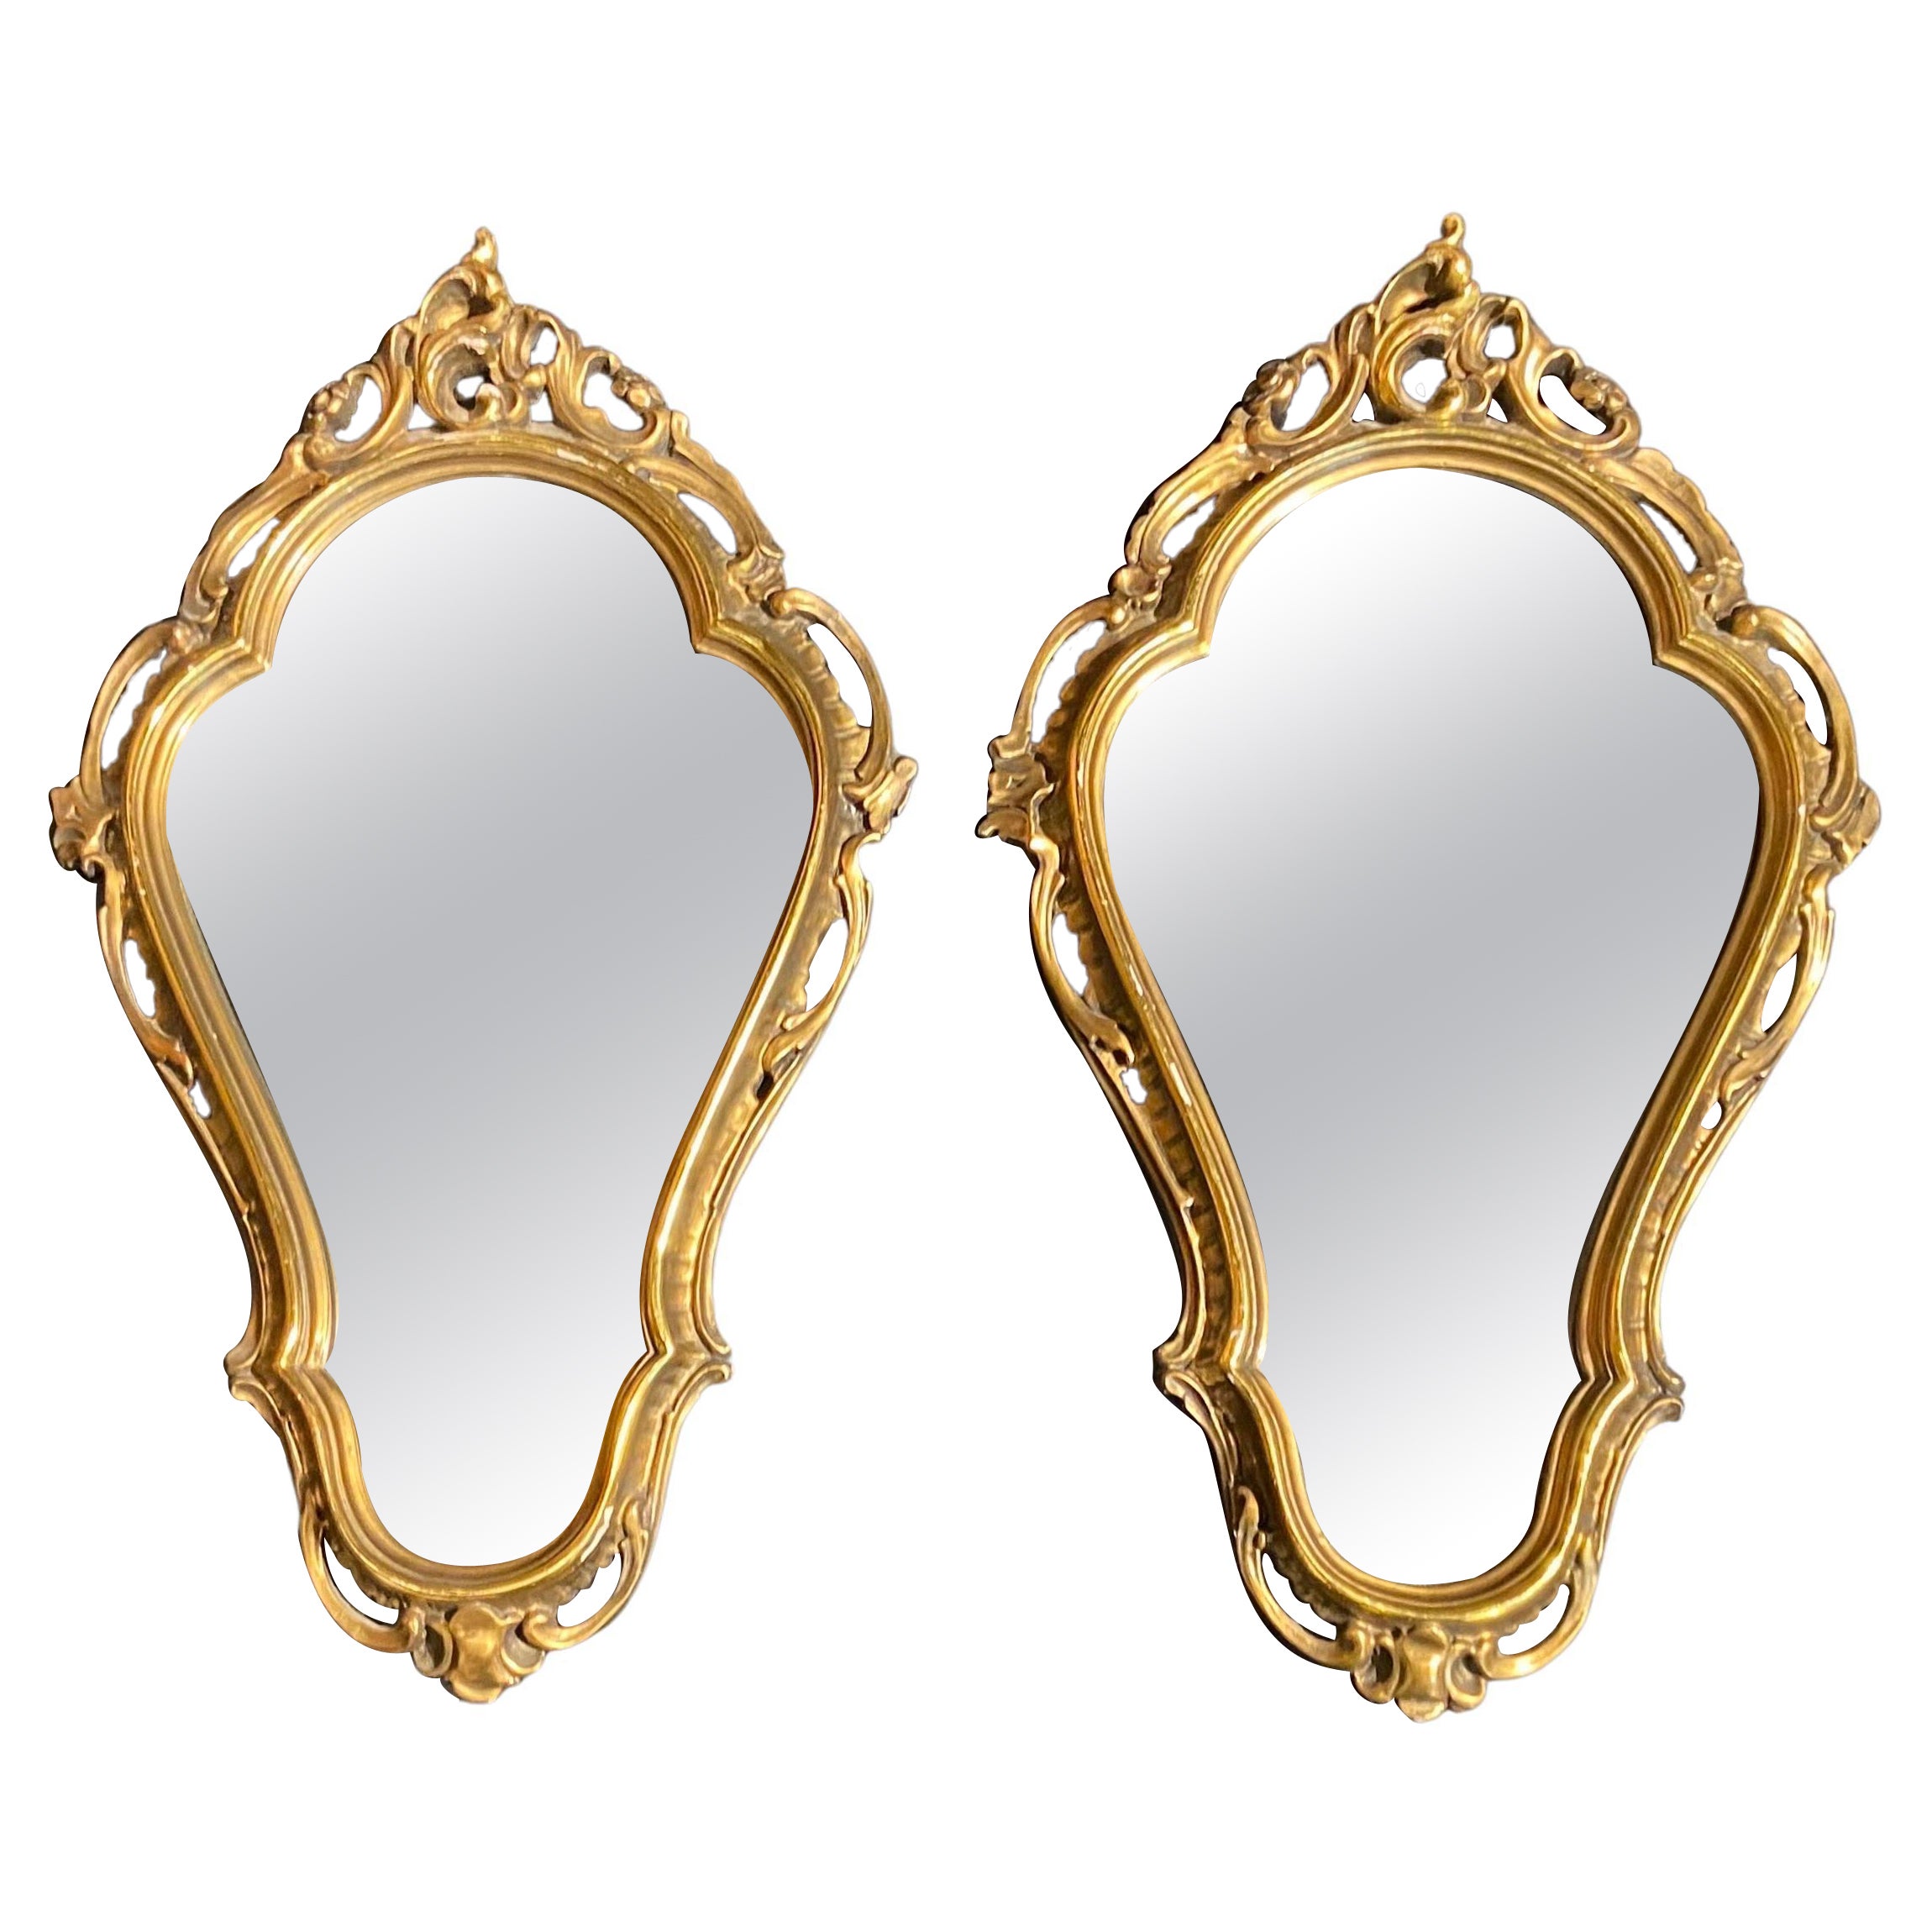 20th Century French Pair of Hand Carved and Gilt Wood Wall Mirrors For Sale